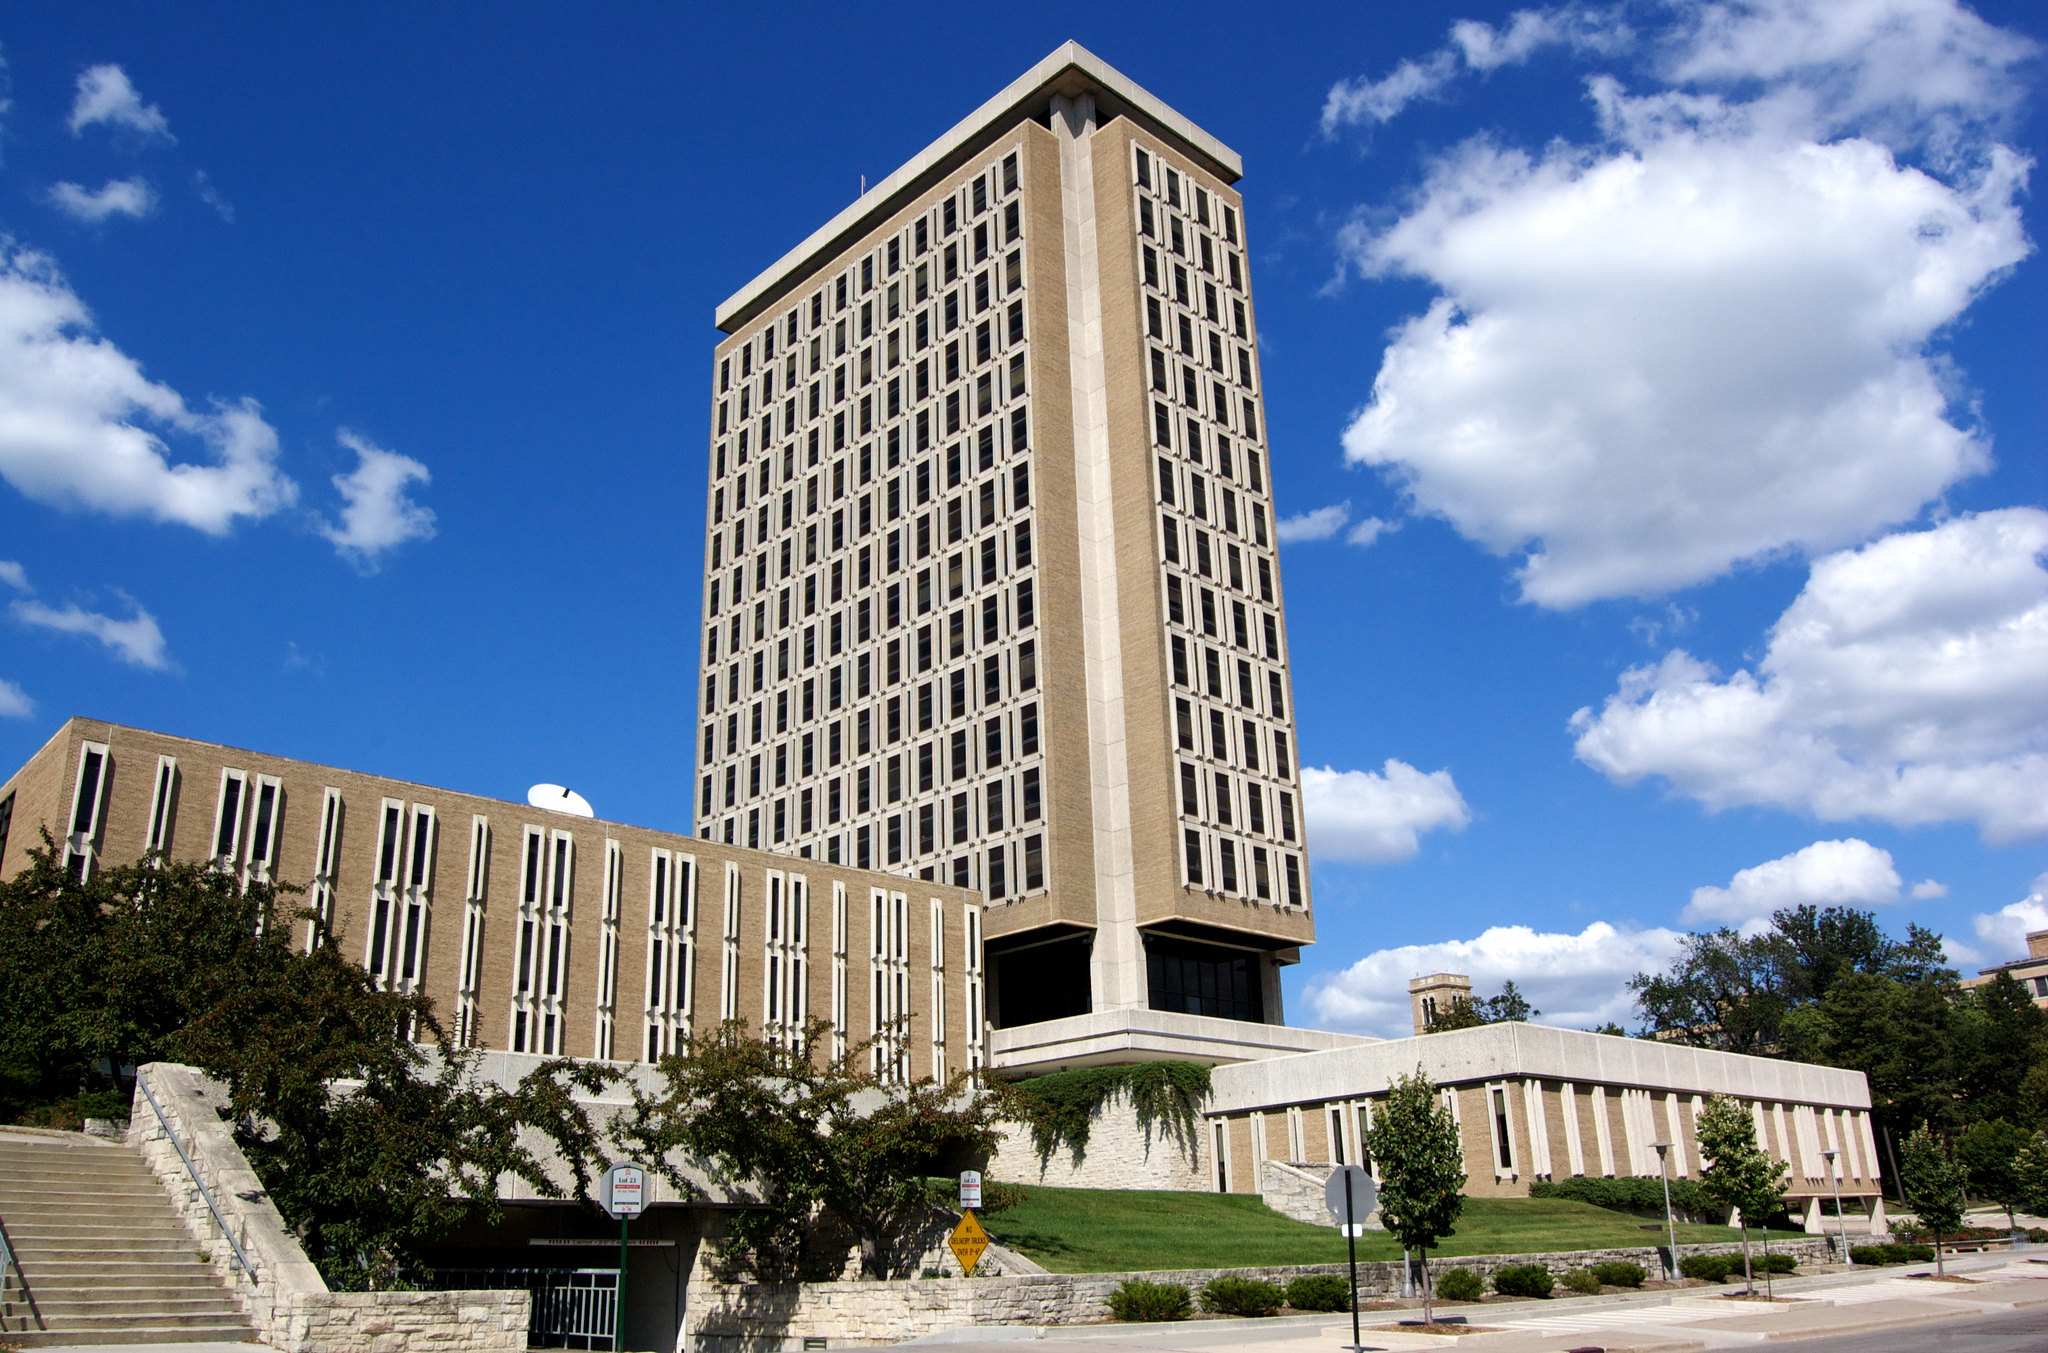 Van Hise Hall, home of University of Wisconsin System offices